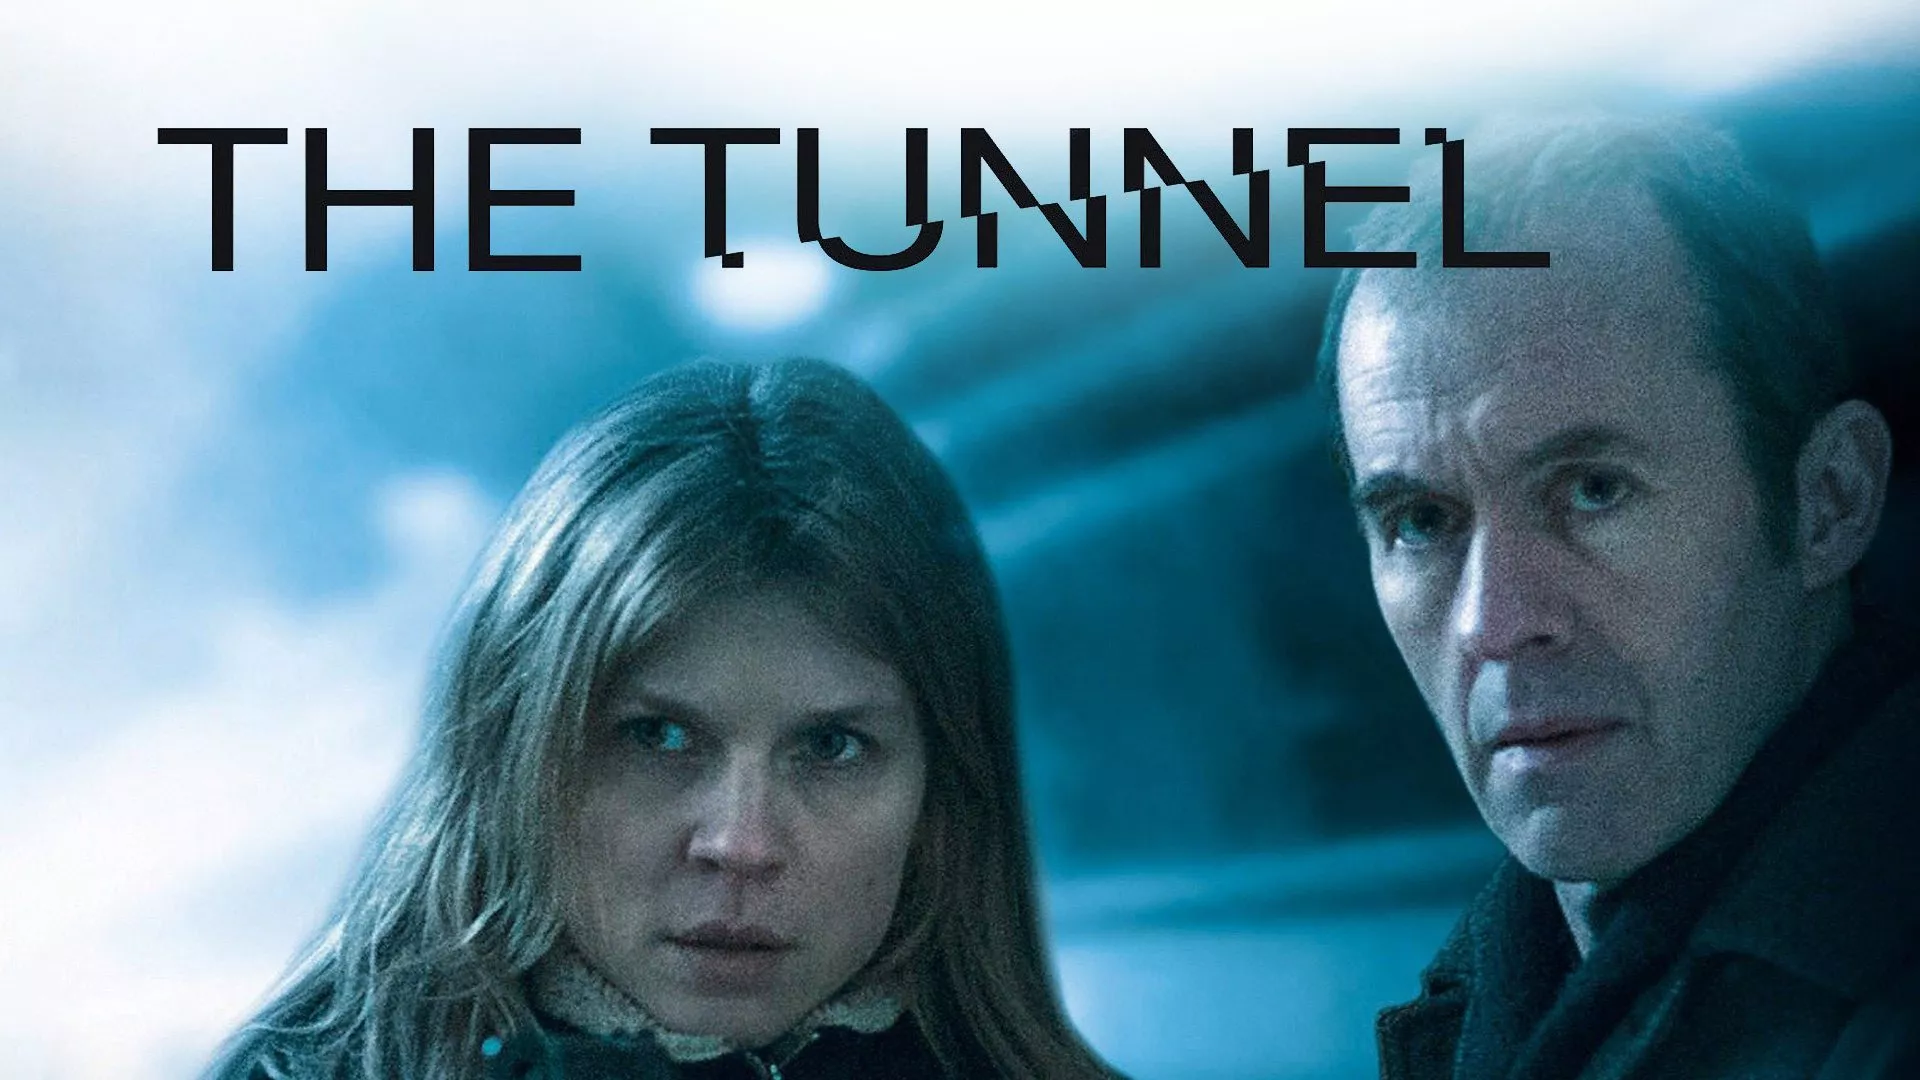 The Tunnel (2013) - Official Trailer